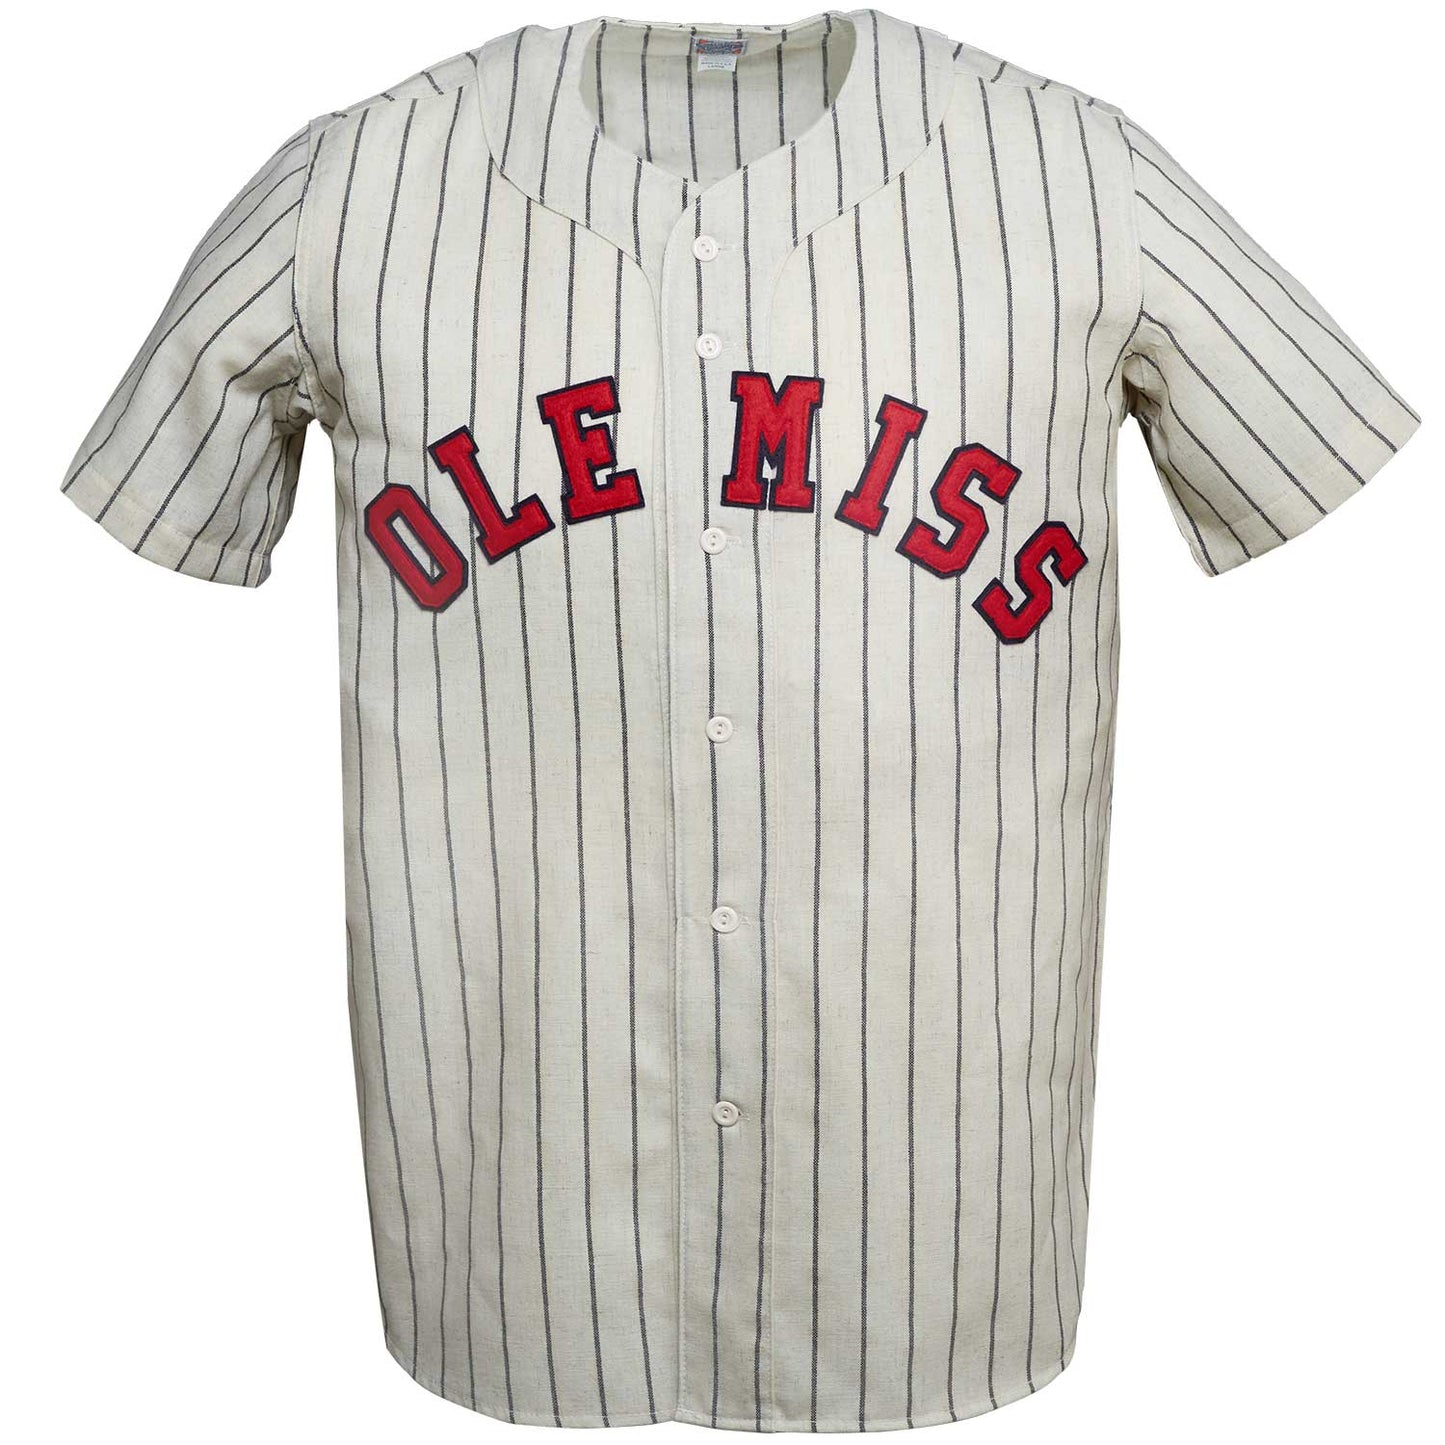 University of Mississippi 1969 Home Jersey